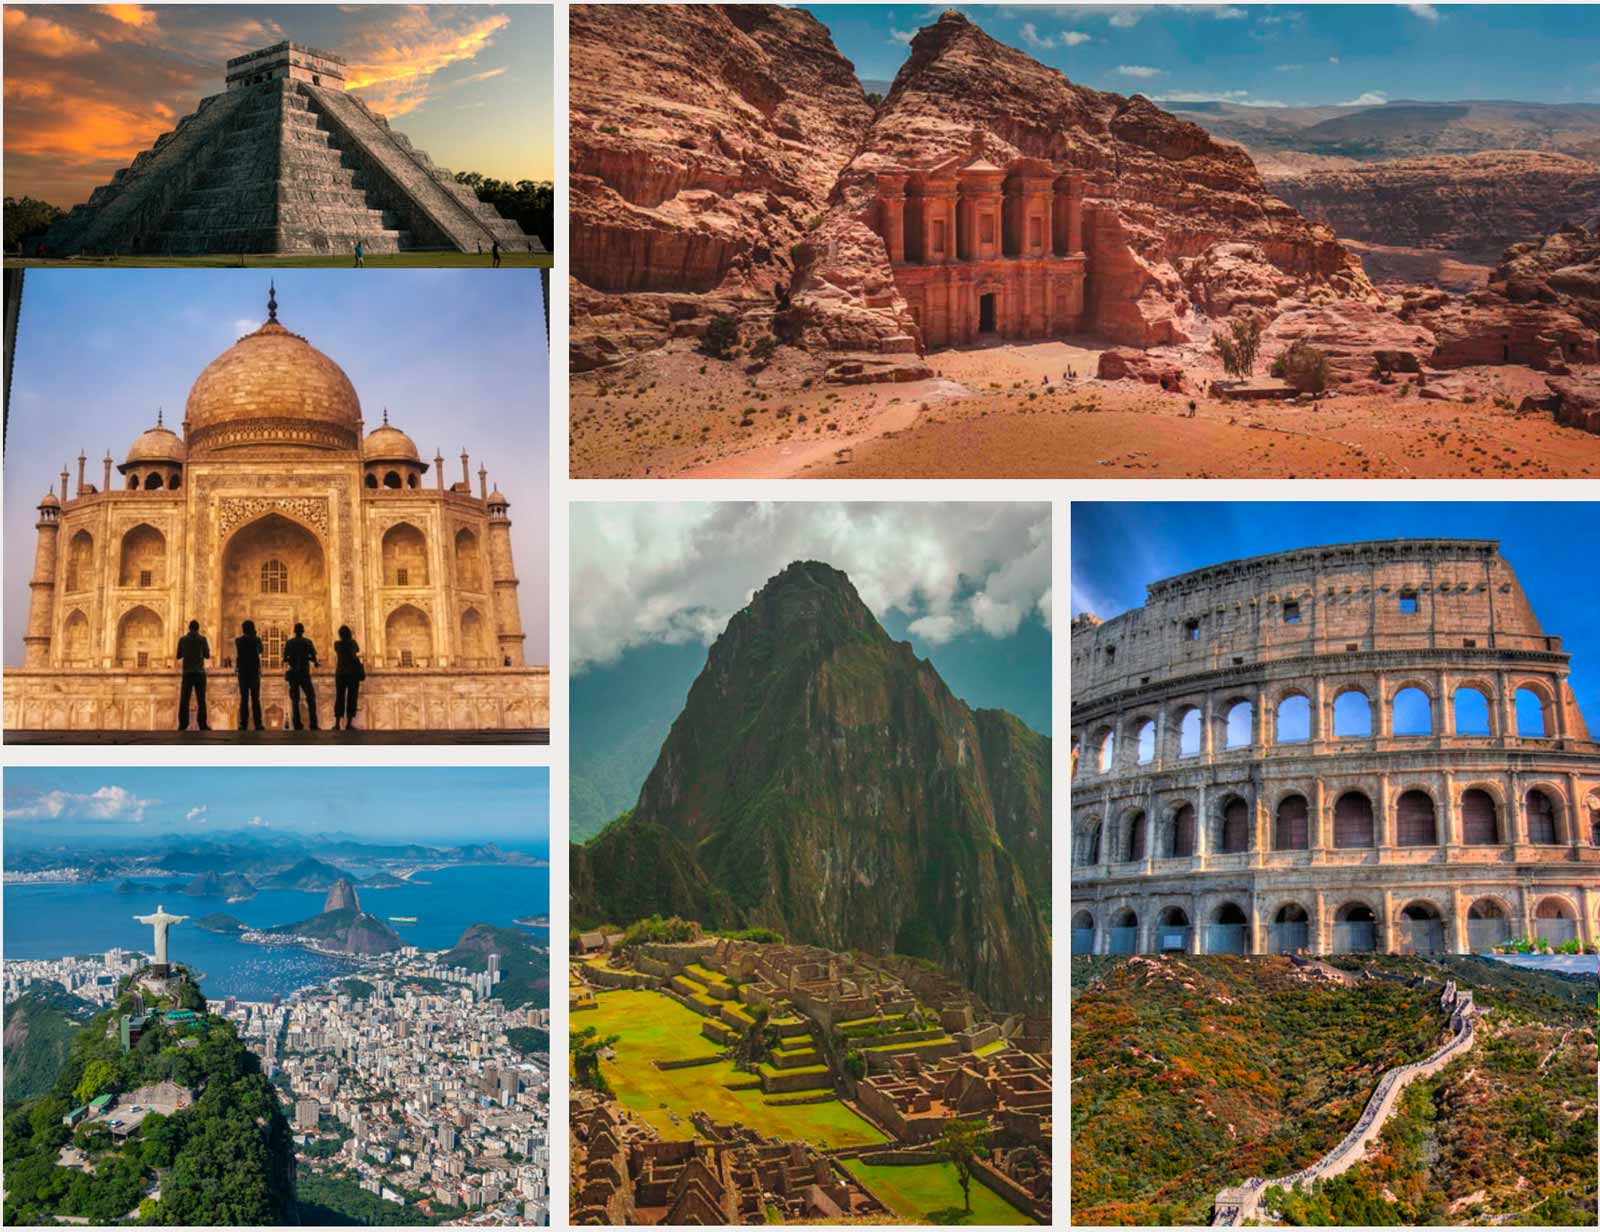 List of 7 Wonders of the World with Pictures